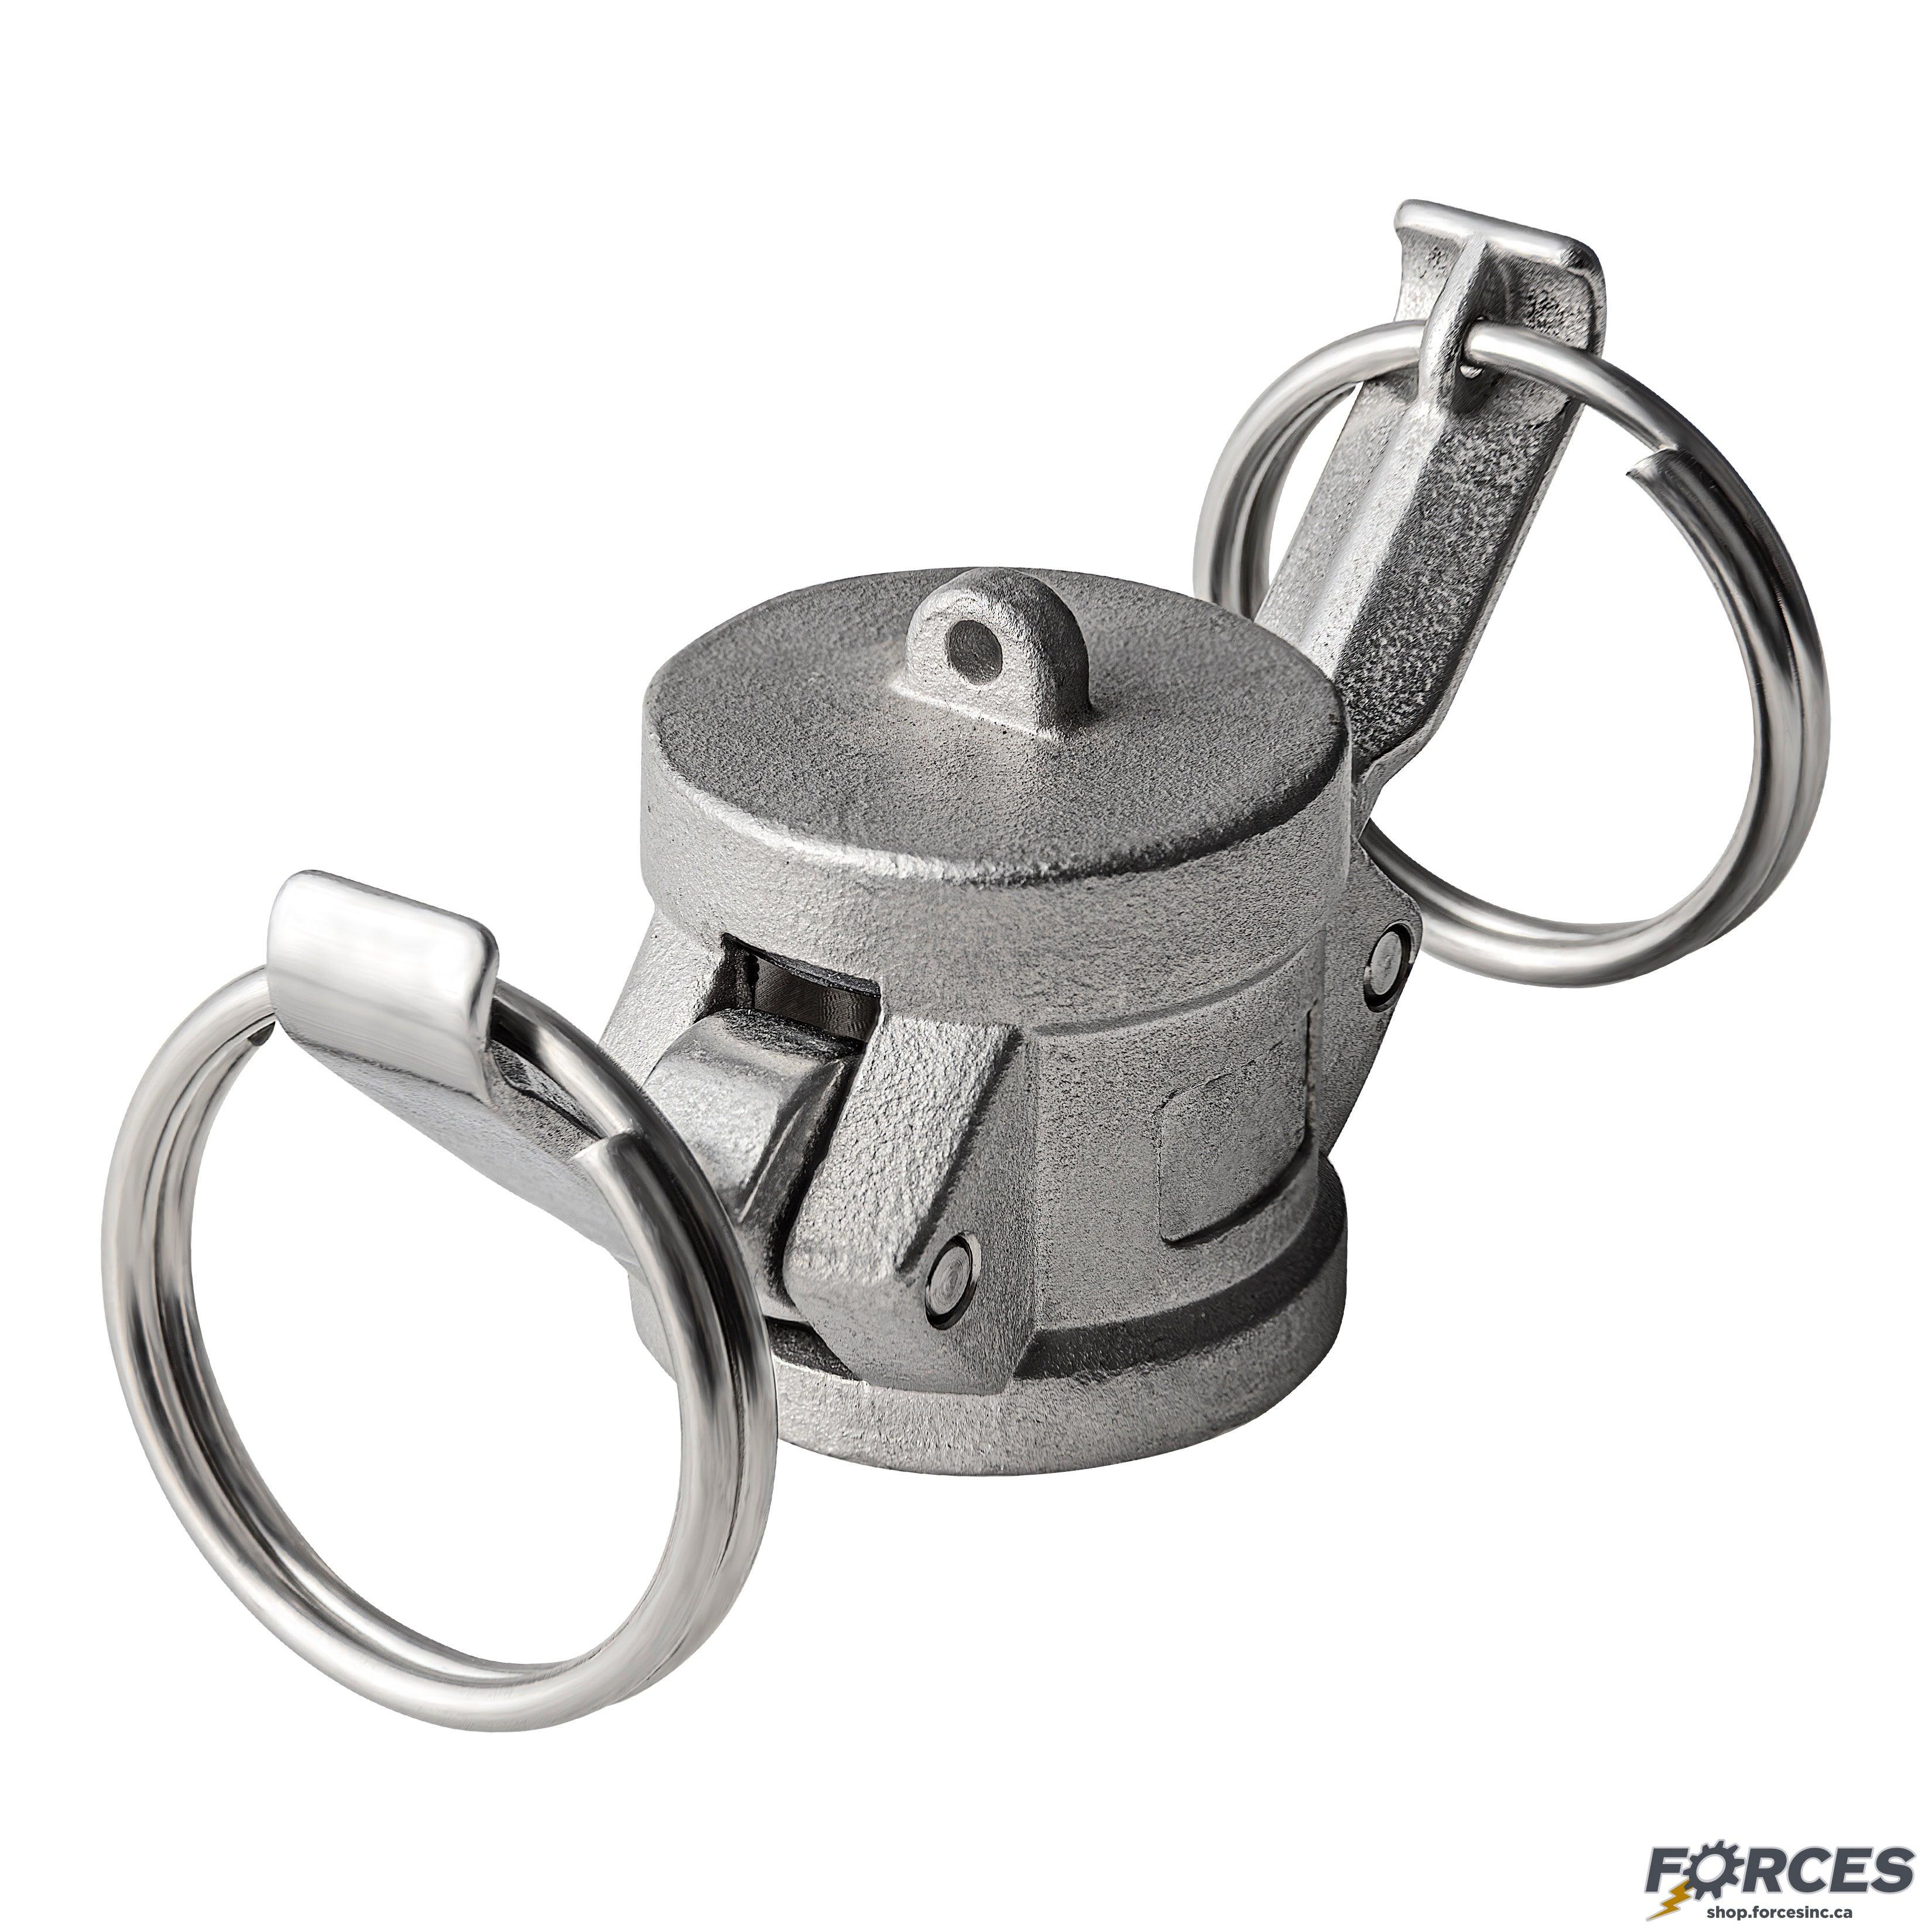 3" Type DC Camlock Fitting Stainless Steel 316 - Forces Inc